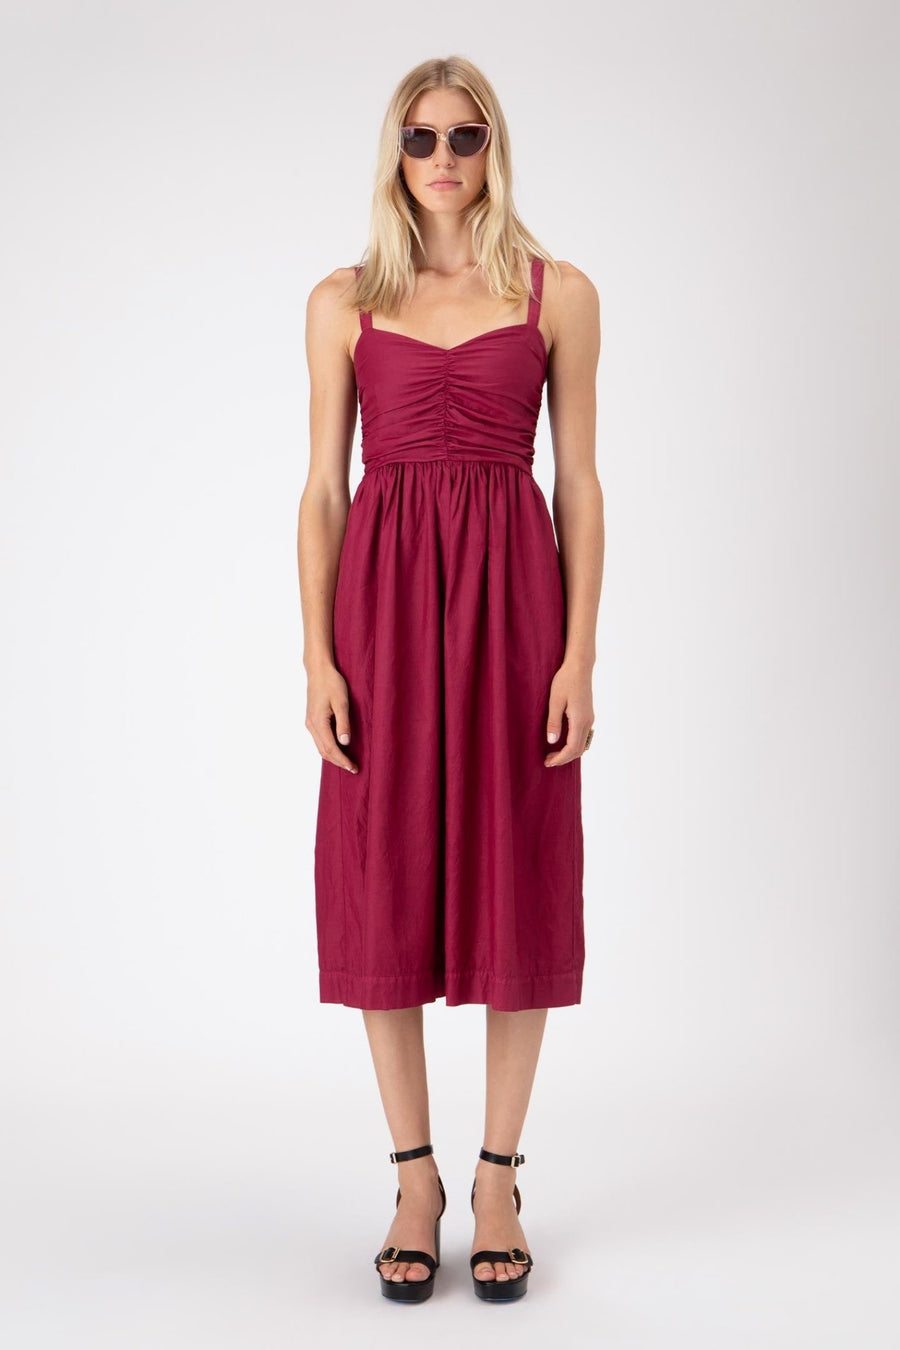 BRYCE RUCHED BODICE DRESS, SANGRIA - Burning Torch Online Boutique